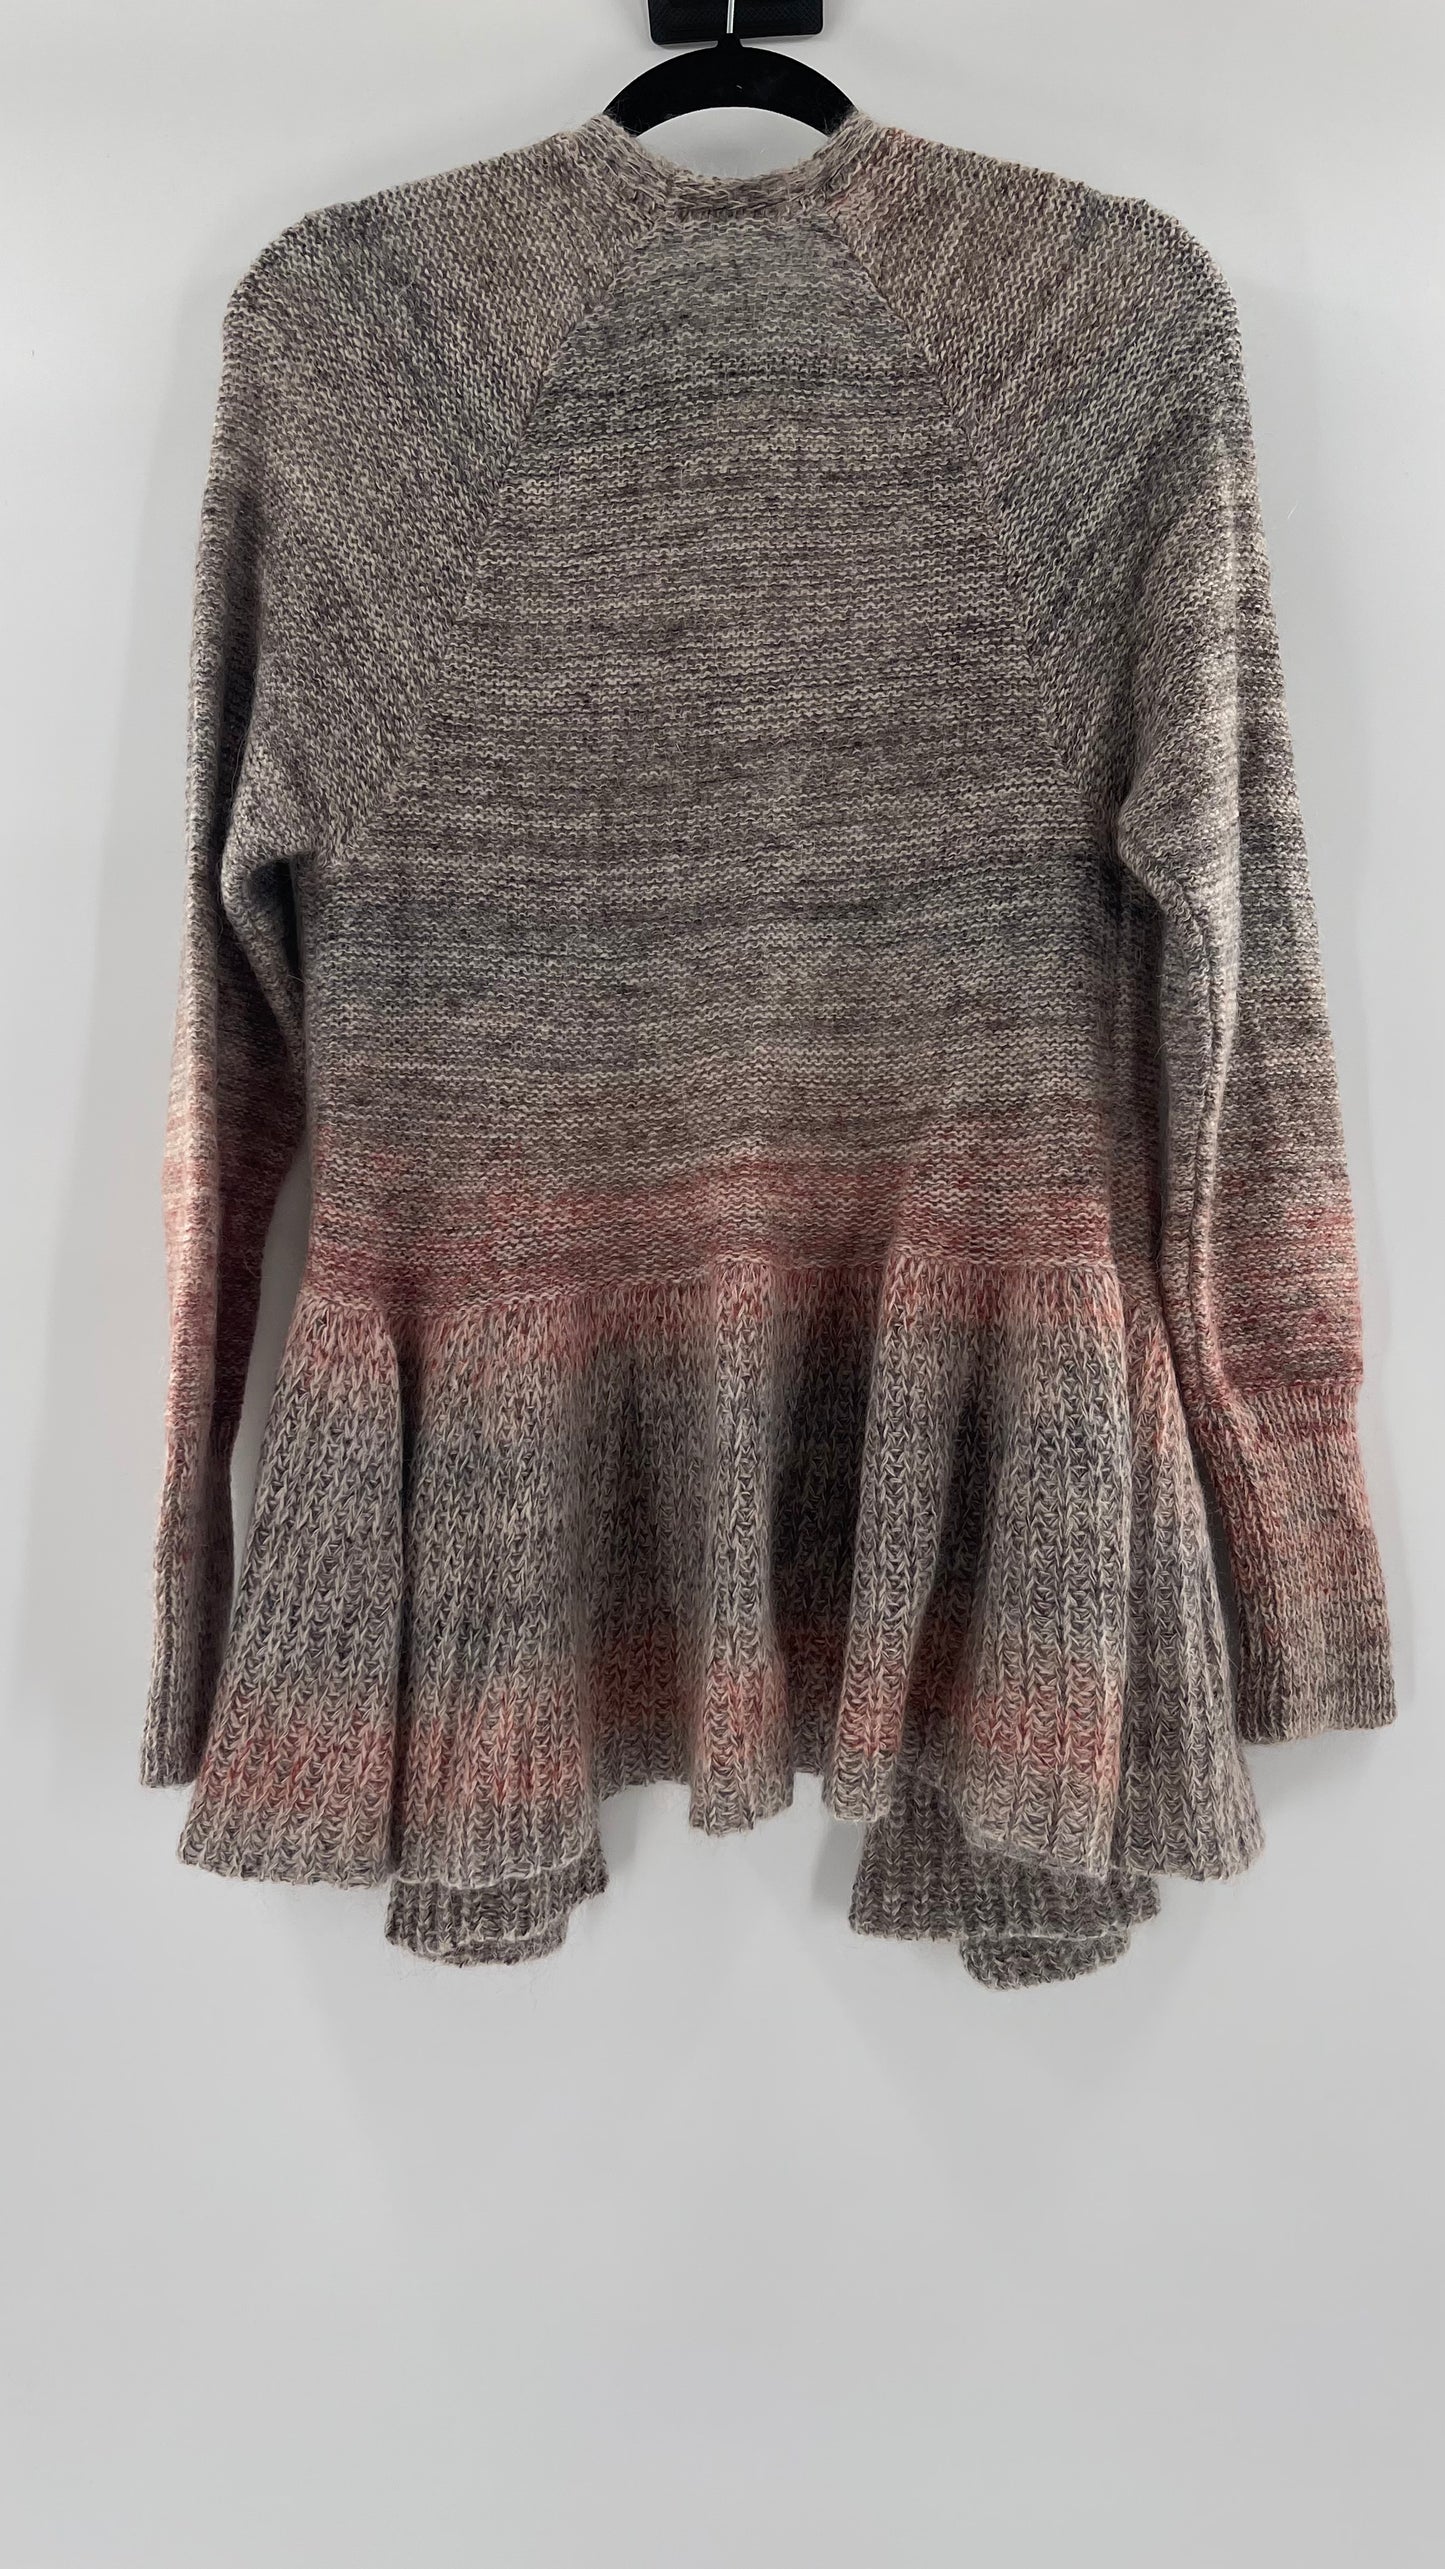 Anthropologie Knitted + Knotted Grey Pink Cardigan (small)